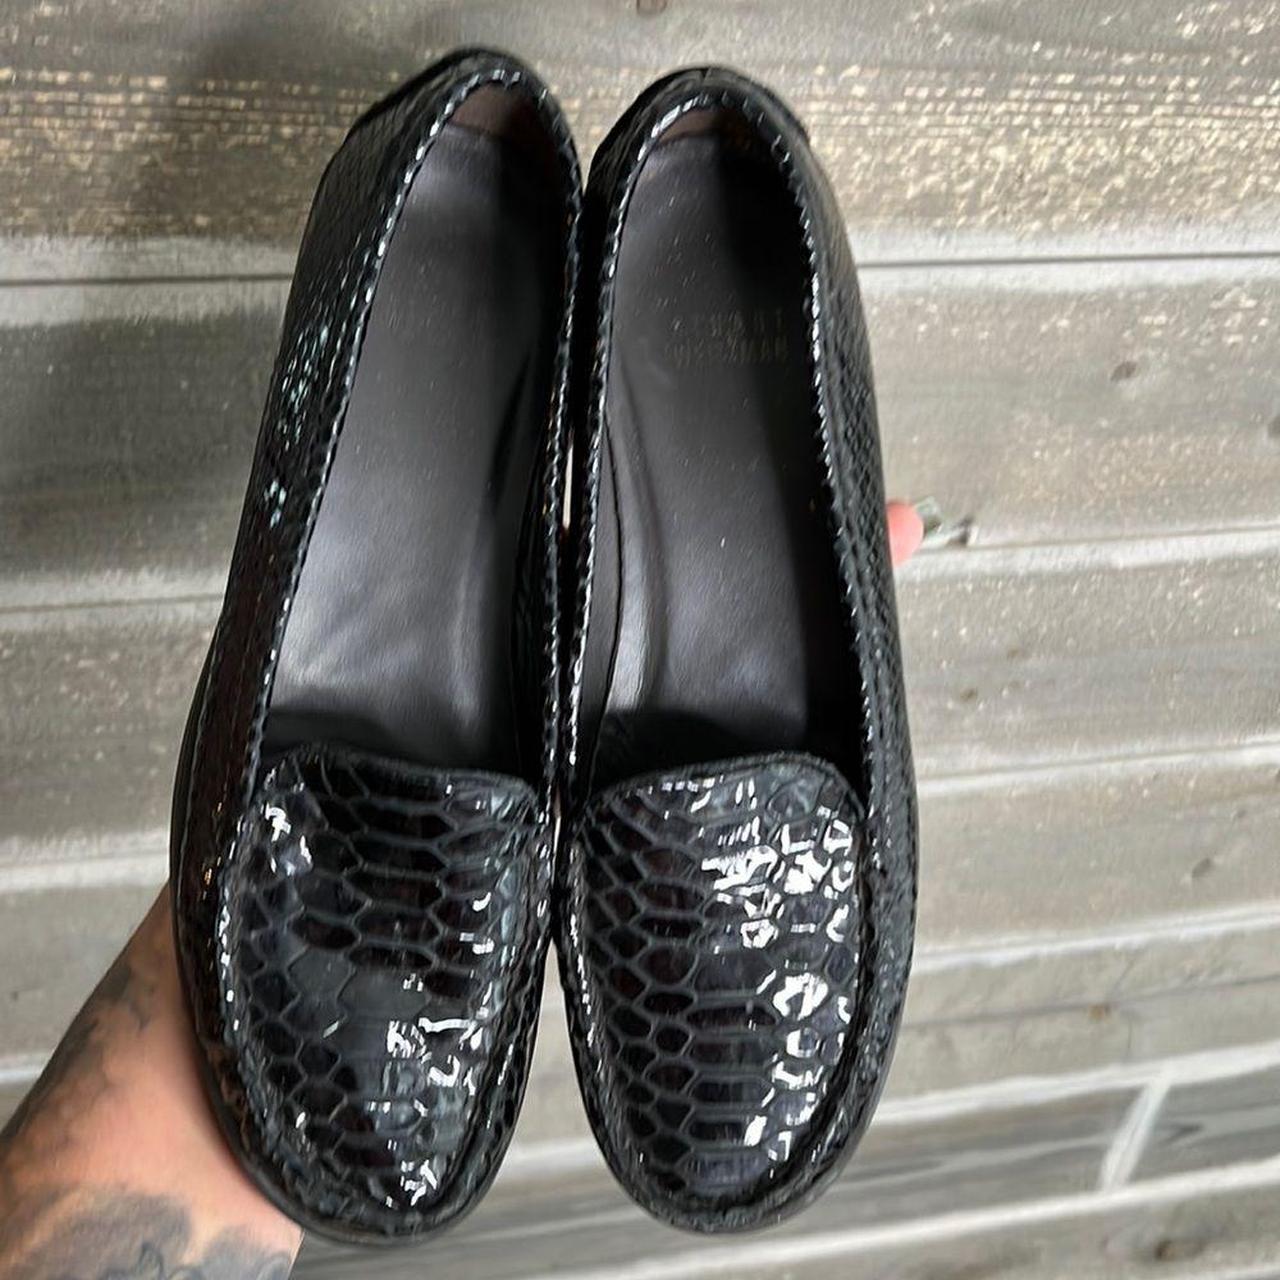 Product Image 1 - Stuart Weitzman Gator Patent Loafers
Preowned